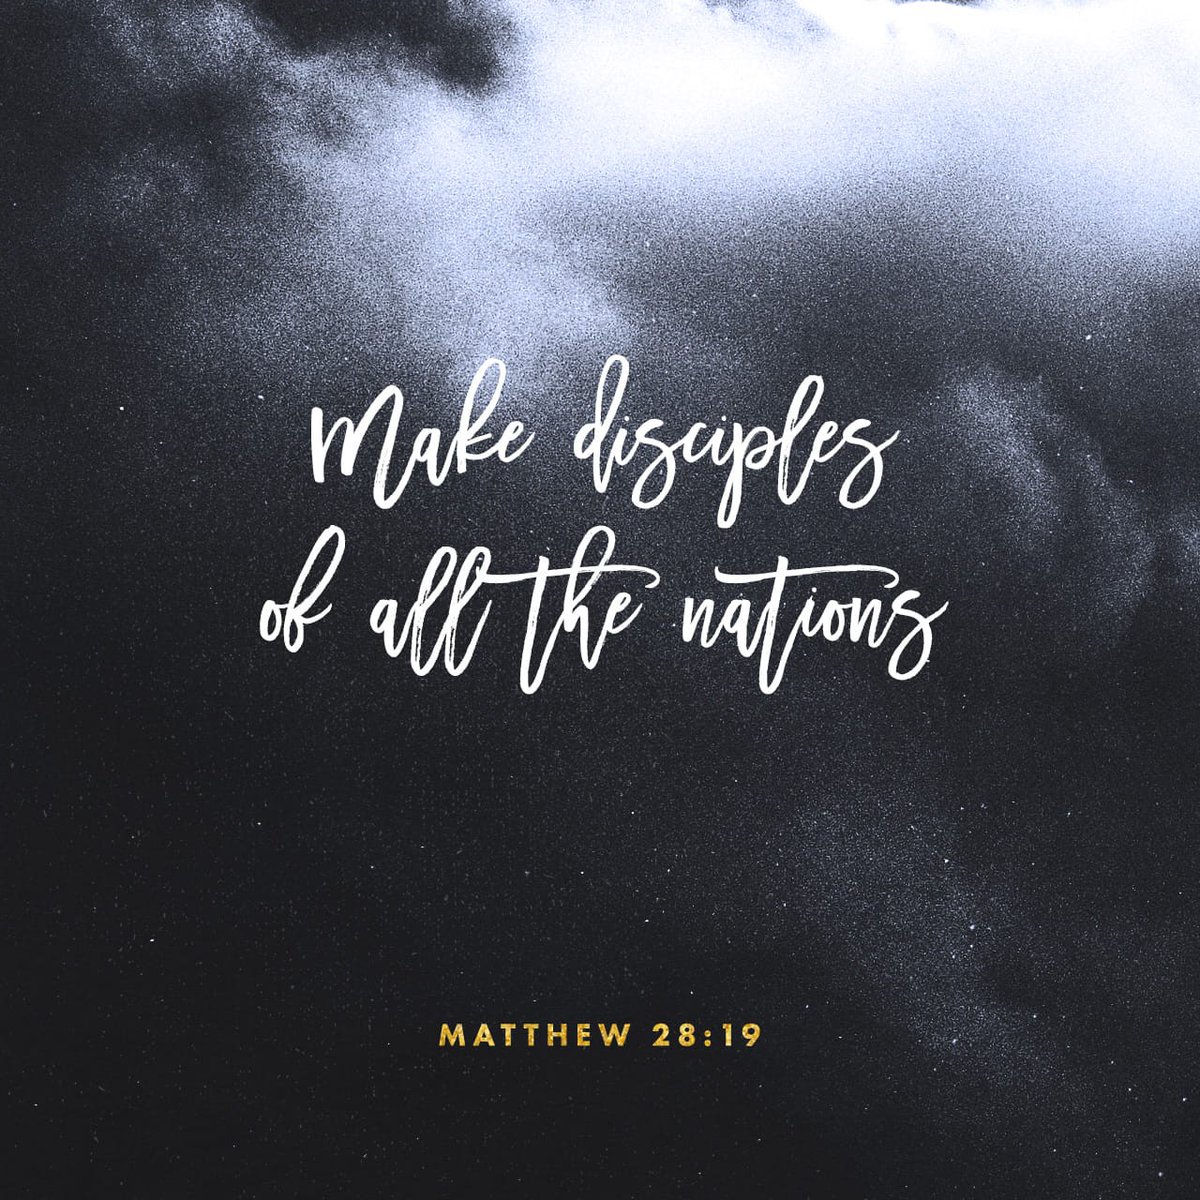 Matthew 28:19 NASB Go therefore and make disciples of all the nations, baptizing them in the name of the Father and the Son and the Holy Spirit #dailybread #dailyverse #scripture #bibleverse #bible #jesus